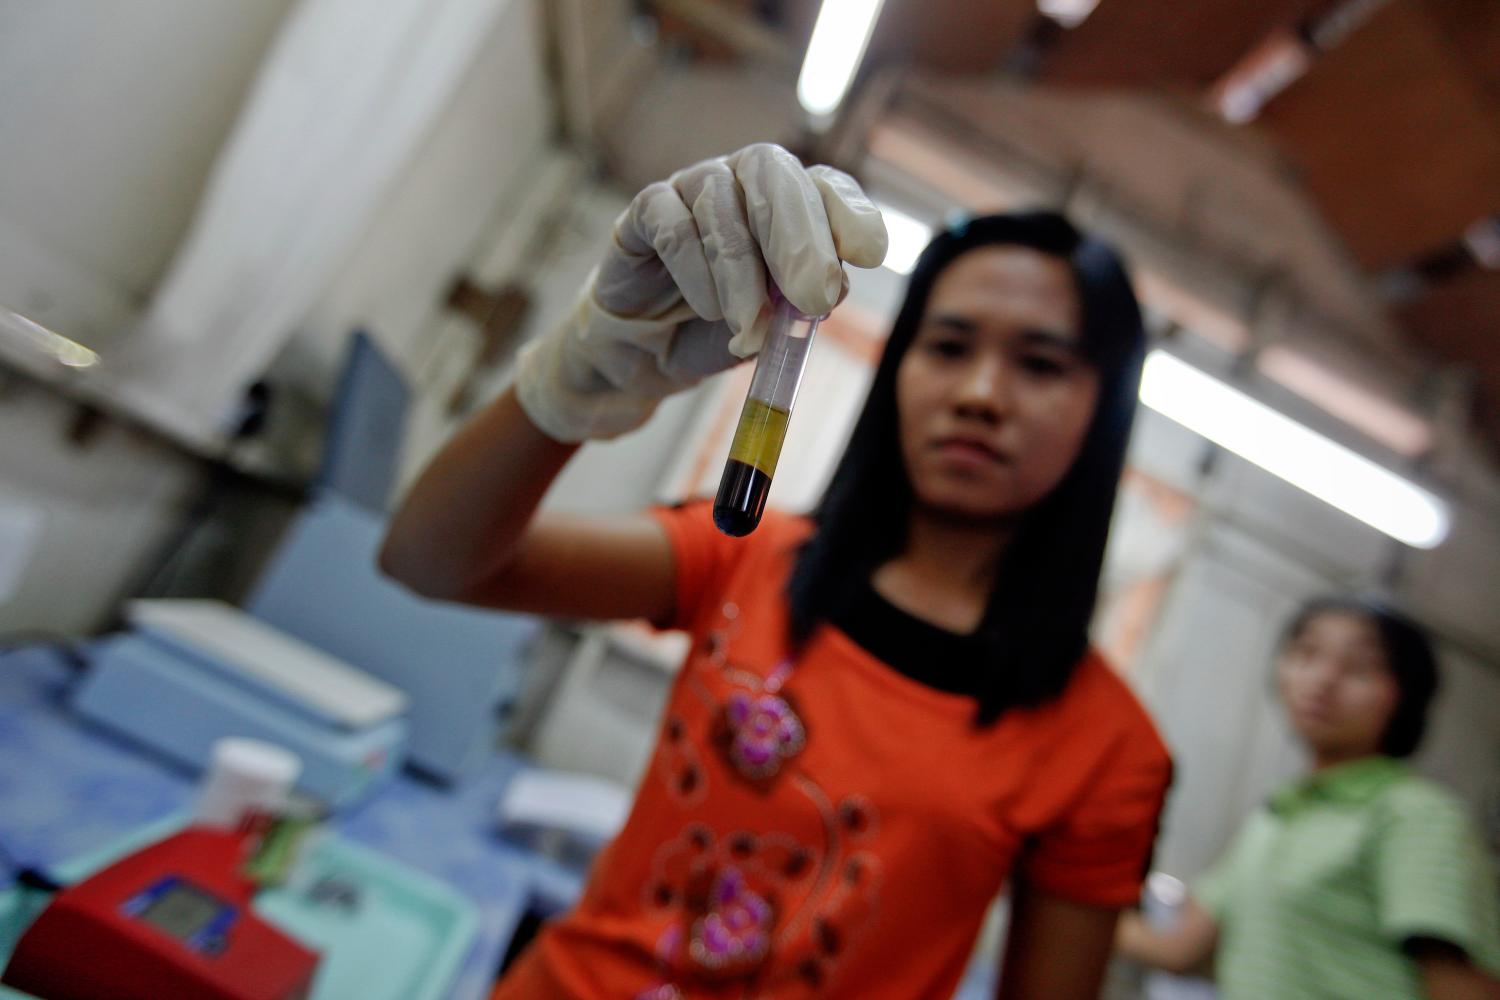 A lab worker holds up a test-tube of blood before conducting HIV tests at Medecins Sans Frontieres-Holland (AZG)'s clinic in Yangon February 21, 2012. Tens of thousands of lives are at risk in Myanmar due to an anticipated funding shortfall to treat people living with HIV and tuberculosis, medical charity Medecins Sans Frontieres (MSF) warned Wednesday, urging international donors to provide immediate support to the impoverished country. Myanmar is already facing "a devastating gap" between people's needs and access to treatment and a decision by the Global Fund to fight AIDS, Tuberculosis and Malaria to cancel funding for 2013 because of a lack of donor money could worsen the situation, the report "Lives in the balance: the urgent need for HIV and TB treatment in Myanmar" said. Picture taken February 21, 2012.   REUTERS/Soe Zeya Tun (MYANMAR - Tags: SOCIETY HEALTH) - GM1E82M0ZJO01